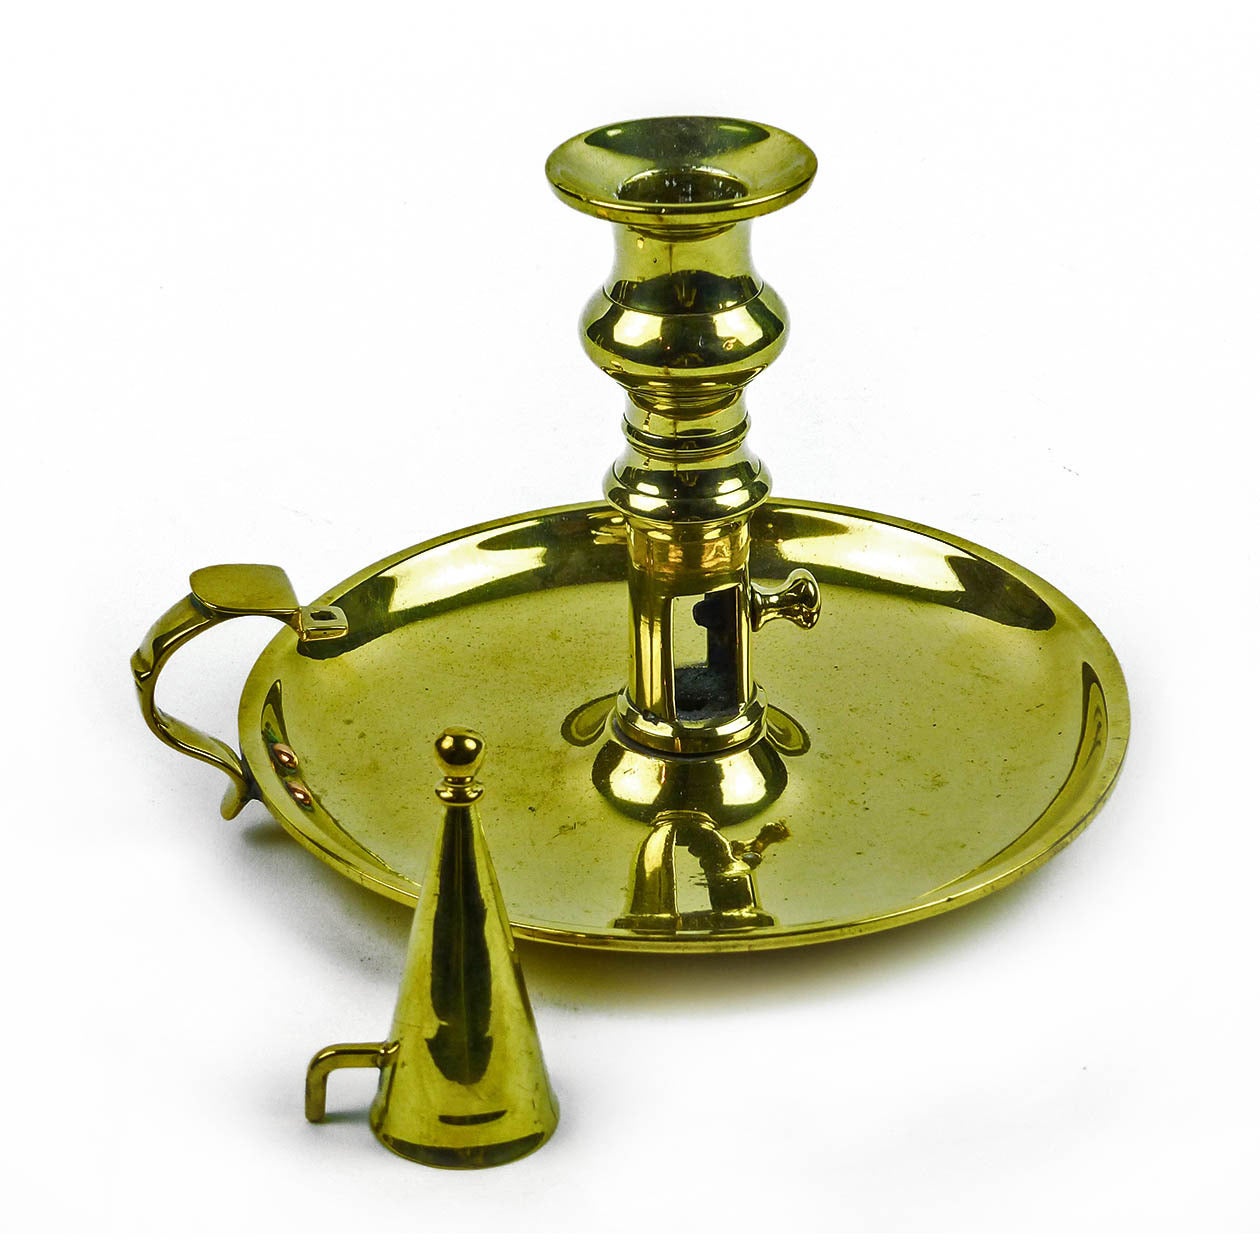 English brass side ejector chamberstick, circa 1800.

With snuffer. Cast shaft.

Measures: Height 4 5/8″, base diameter 6 1/2″.